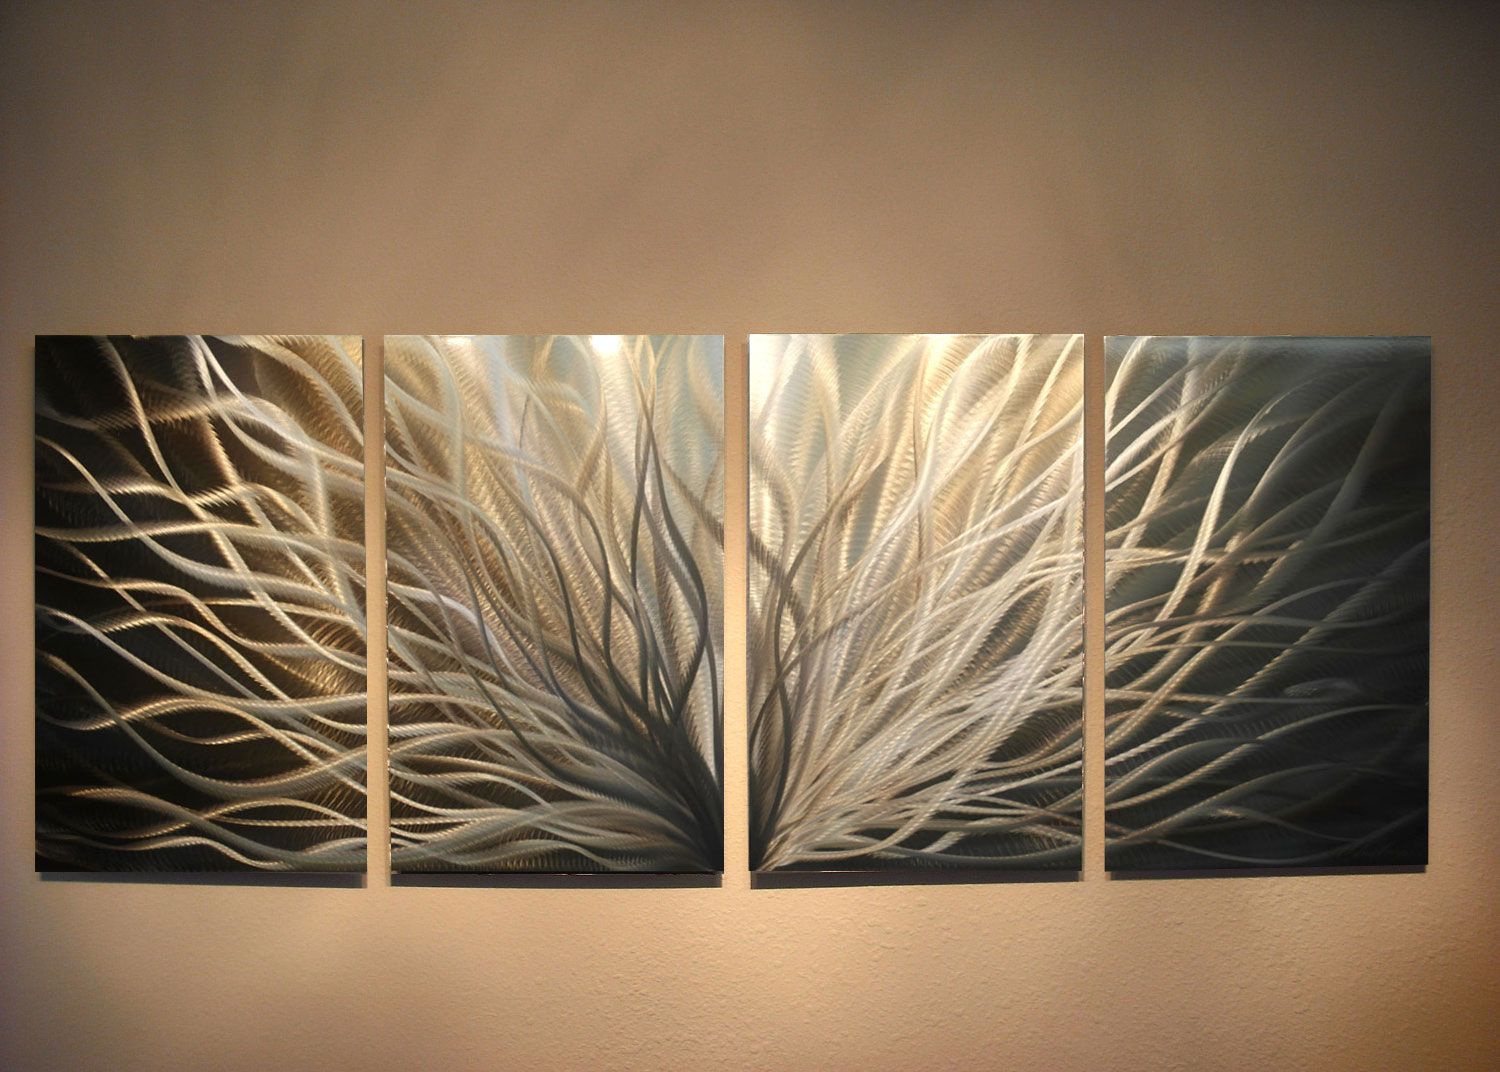 Abstract Metal Wall Art  Radiance Gold Silver  Contemporary Modern For Gold And Silver Metal Wall Art (View 6 of 15)